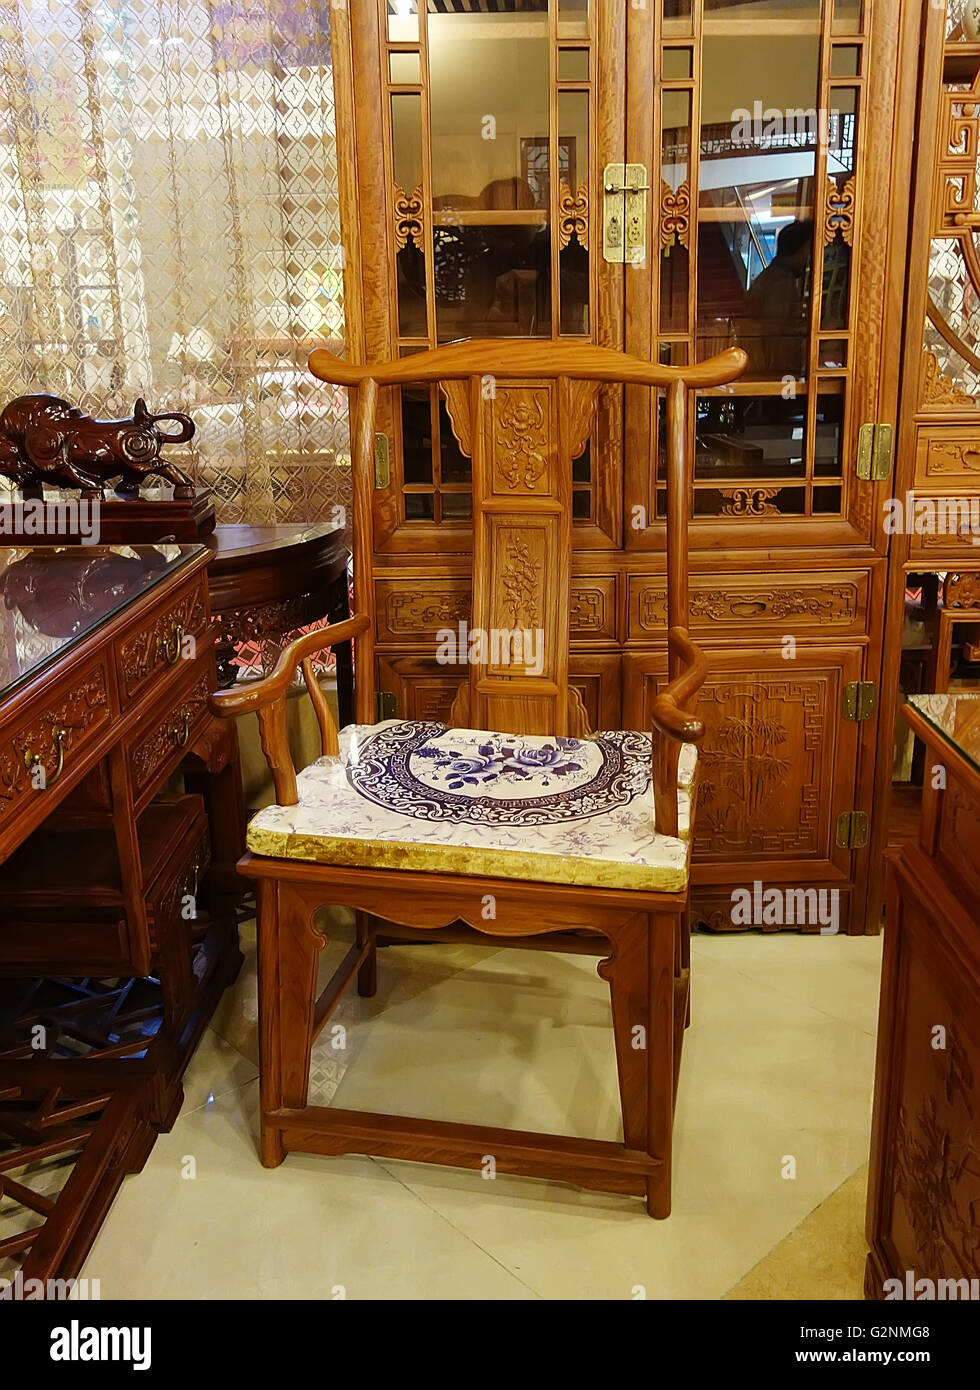 Chinese antique ming style furniture made from elm wood Stock Photo